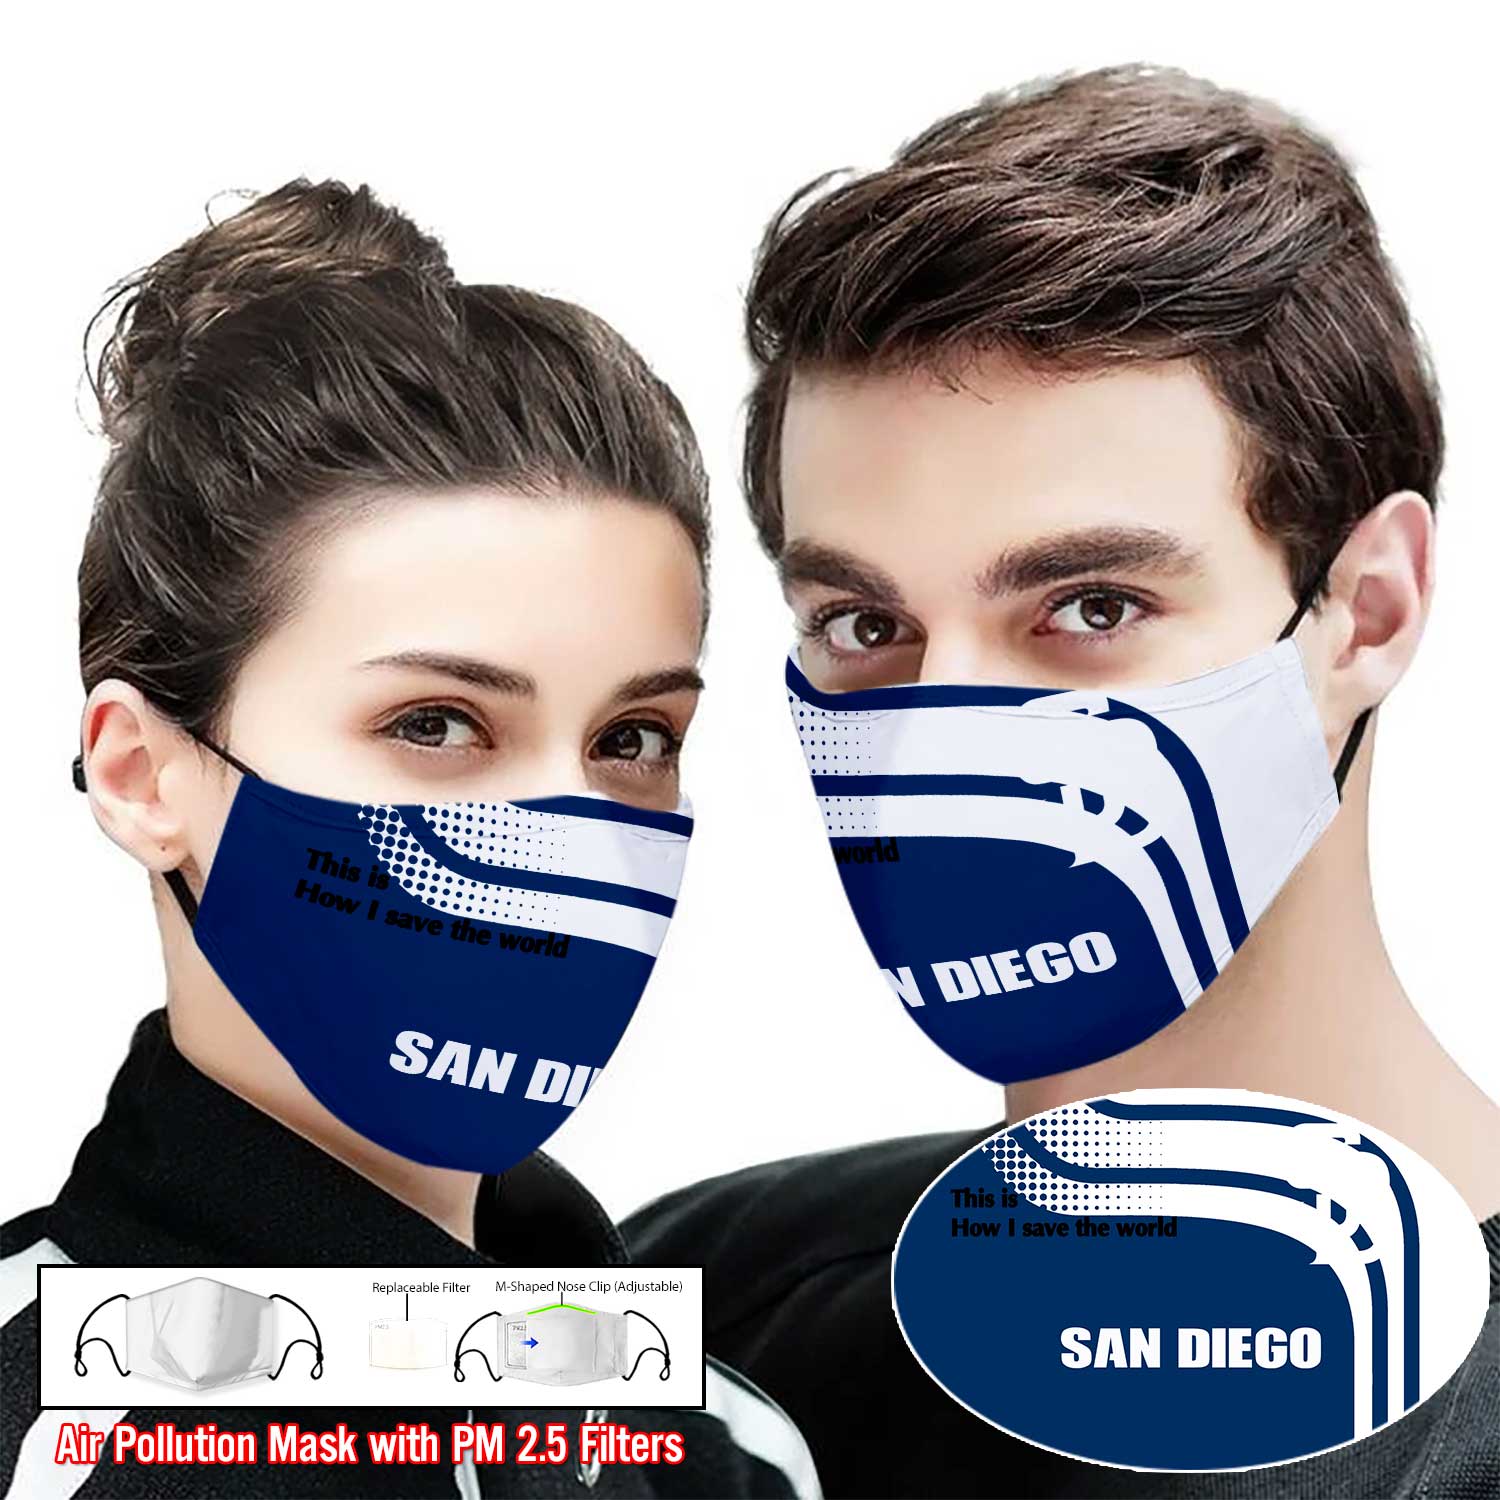 San diego padres this is how i save the world face mask